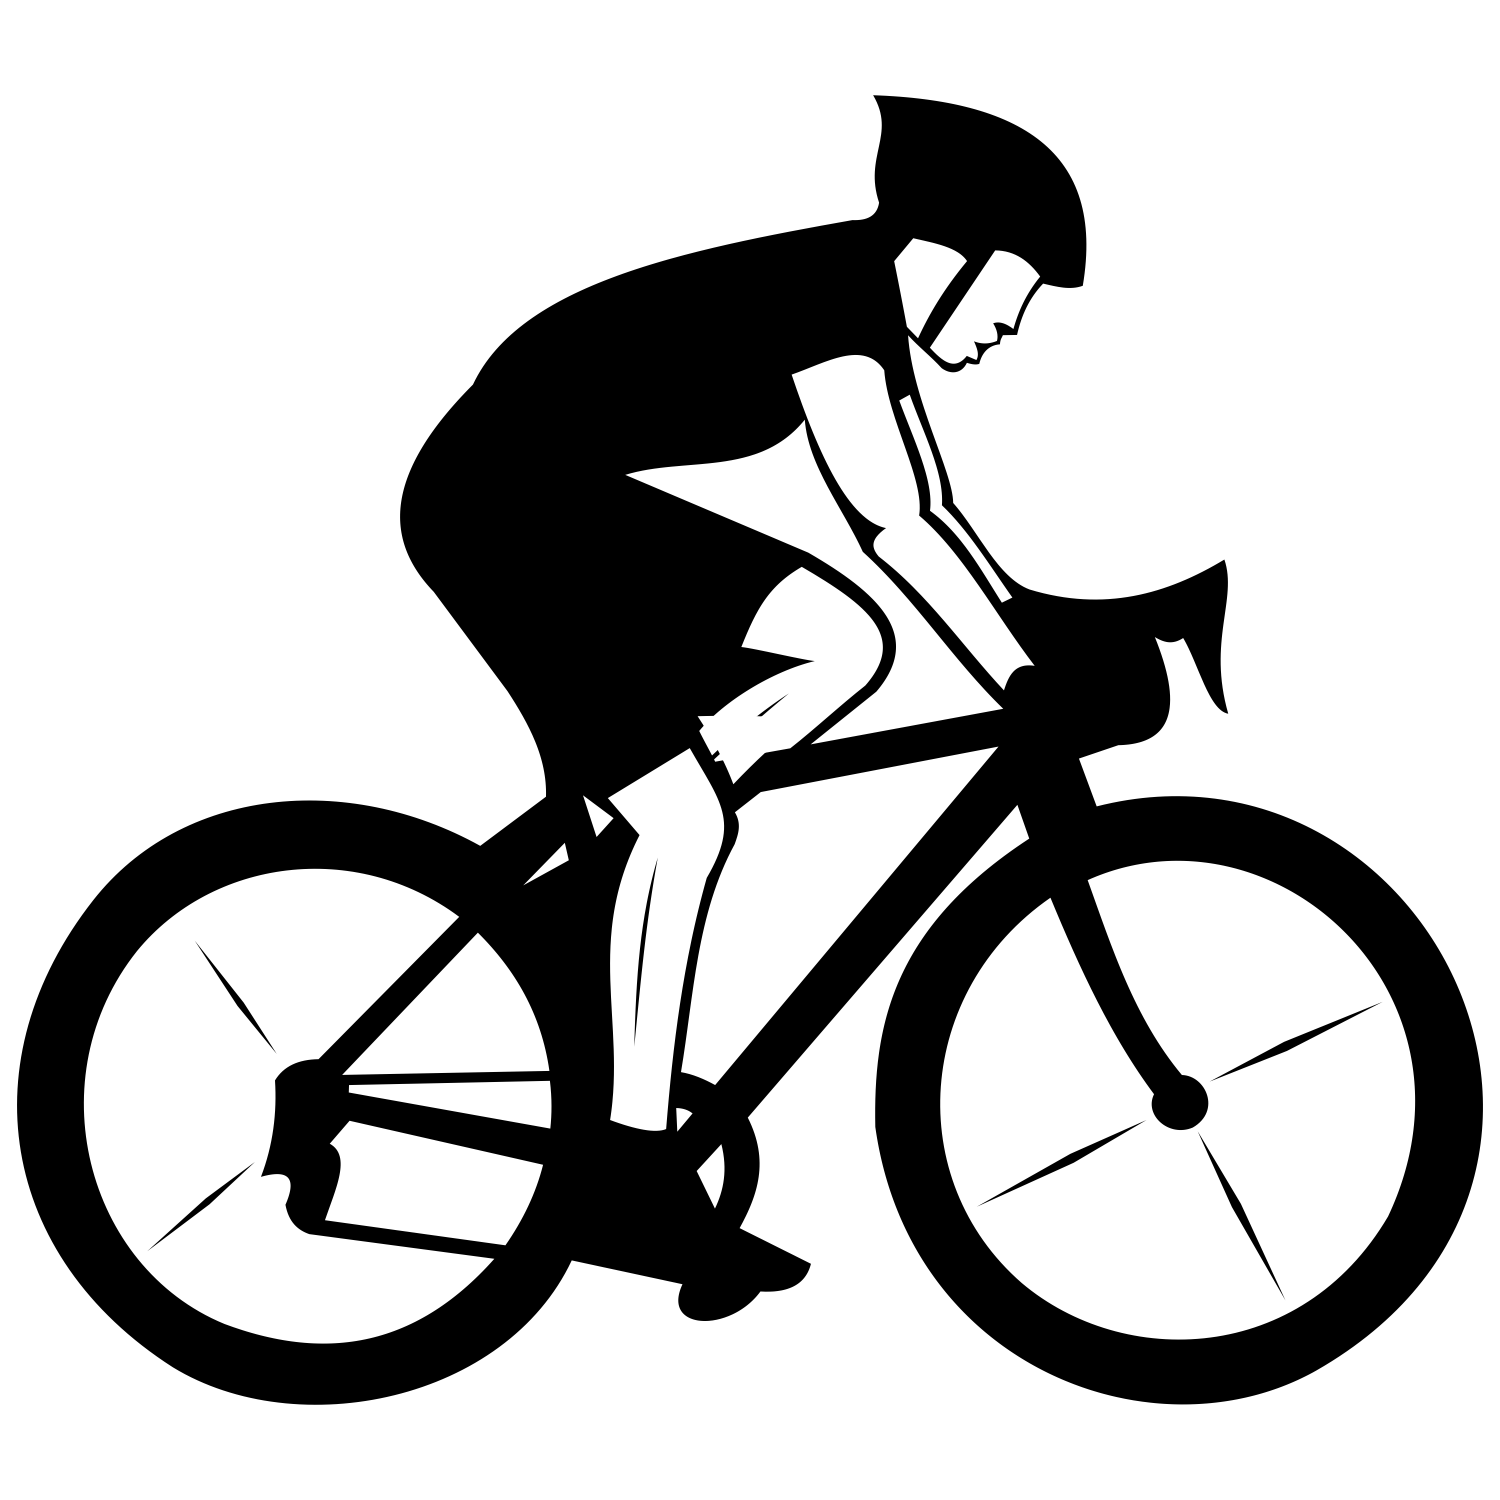 free vector clipart bicycle - photo #13